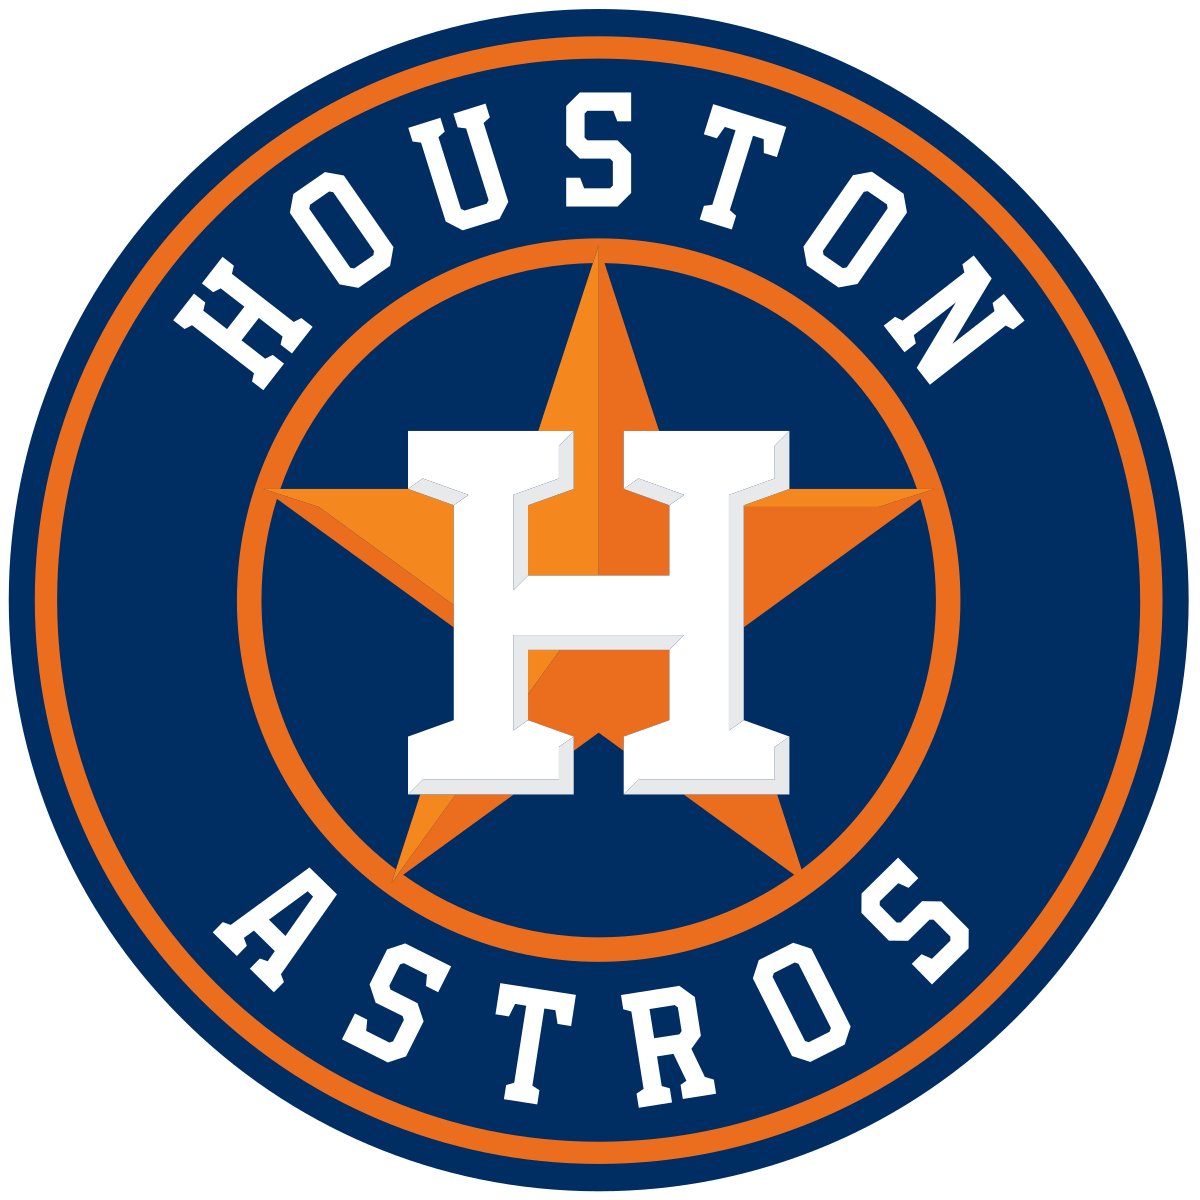 Houston Astros extend Minute Maid Park's official team store hours for fans  to score coveted gear - CultureMap Houston